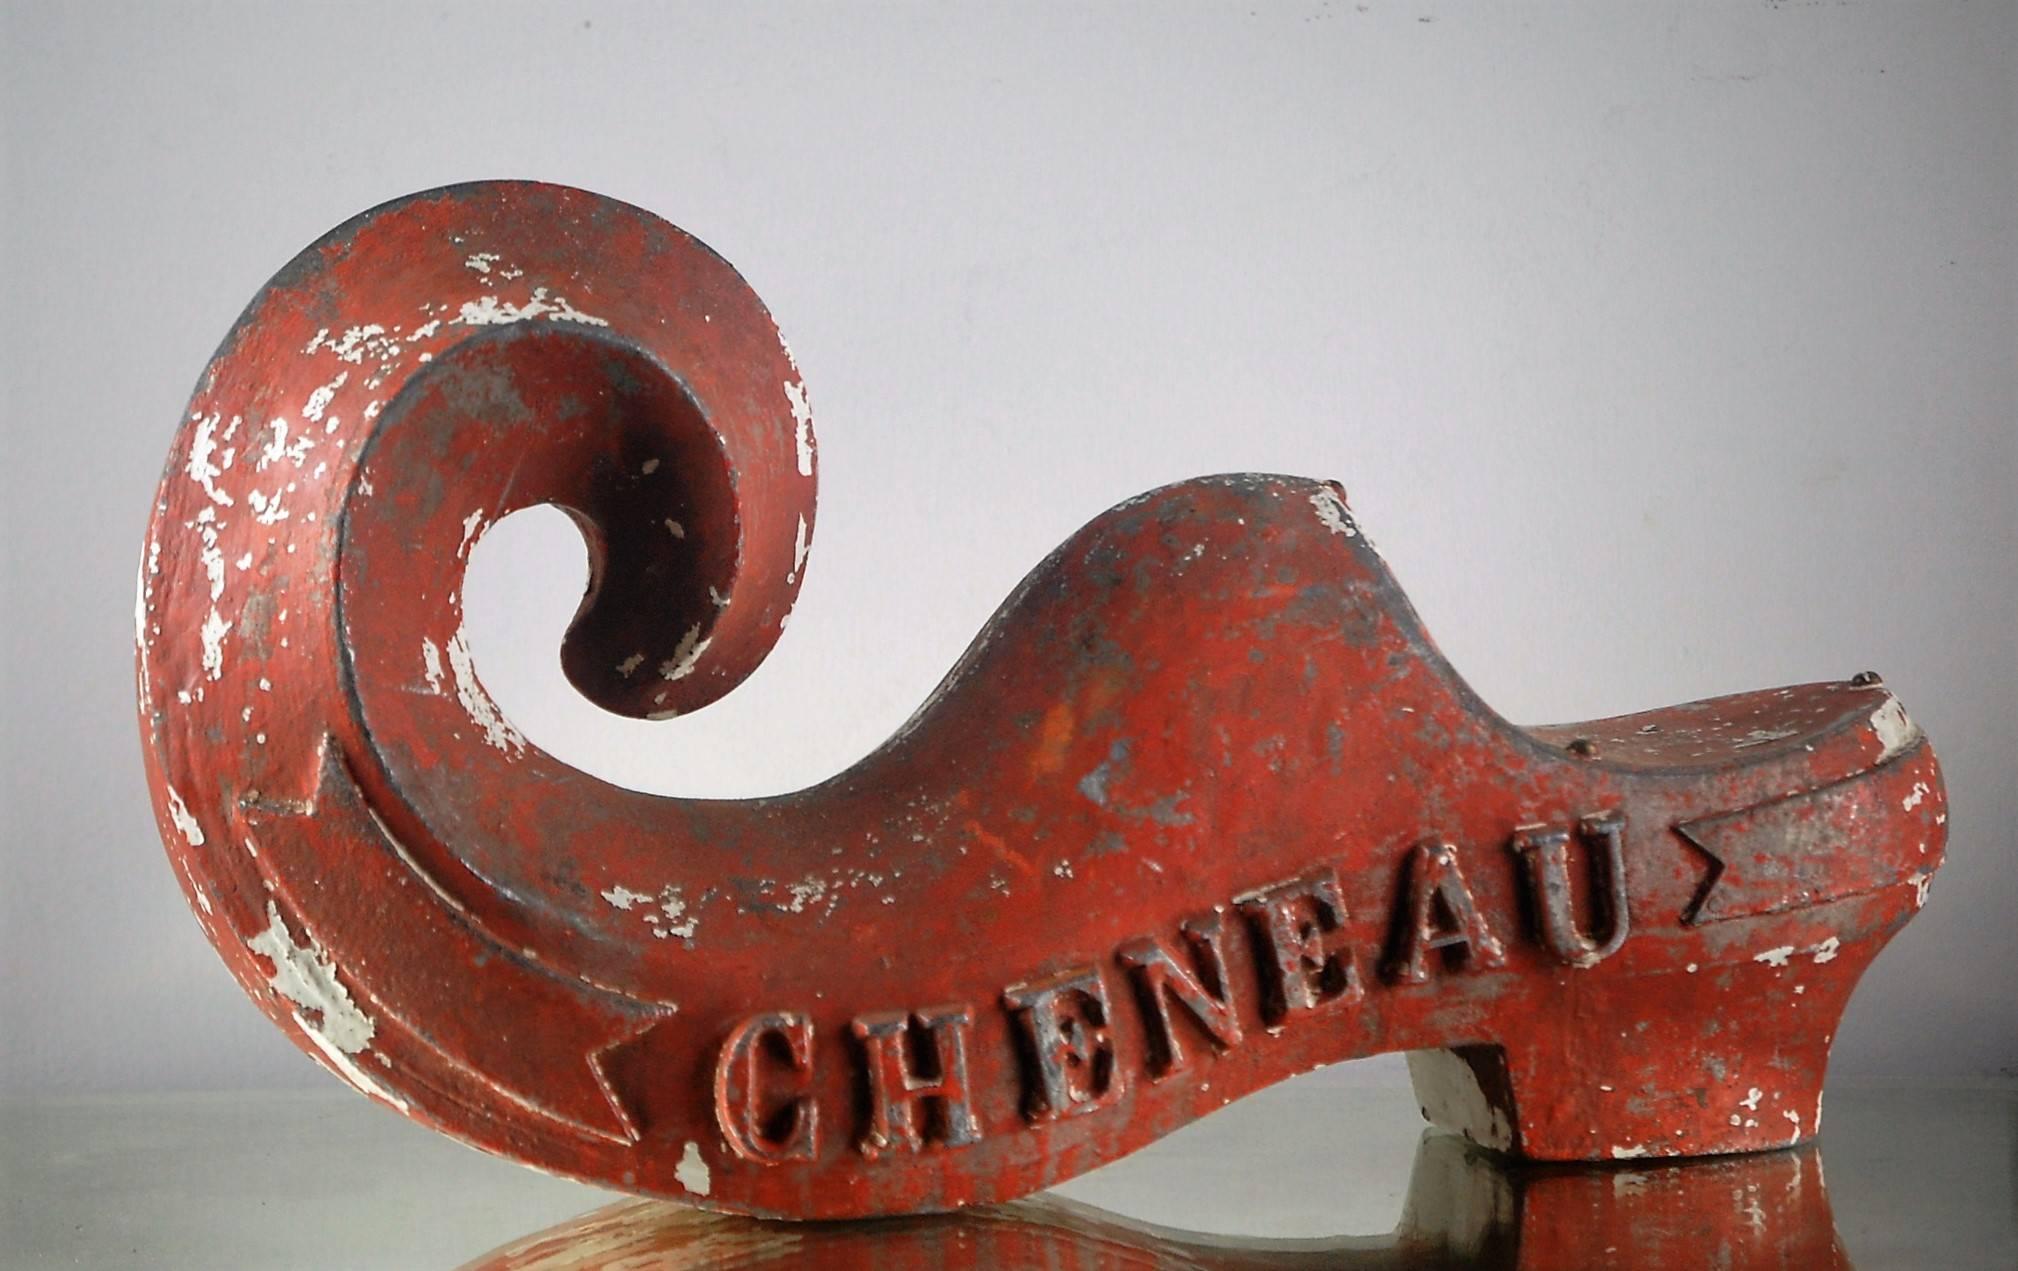 Wonderful stylised oversized clog makers trade sign of cast metal. Delightful patination and paint loss. Cheneau is the family name of the clog maker. Still a popular form of footwear at the time especially in the rural areas. Burgundy, France. All